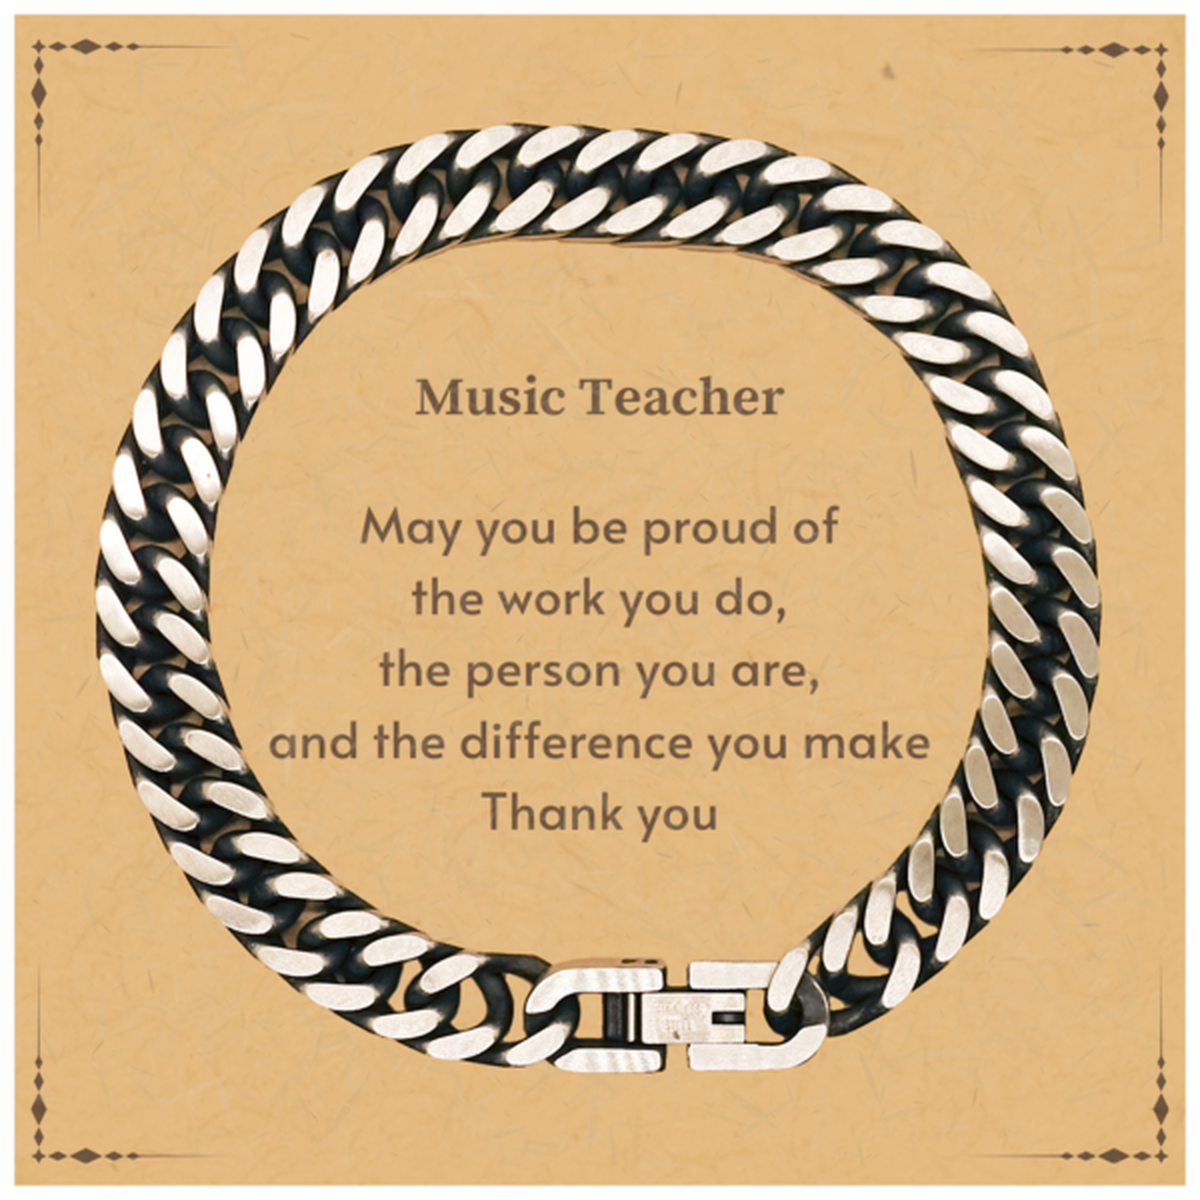 Heartwarming Cuban Link Chain Bracelet Retirement Coworkers Gifts for Music Teacher, Music Teacher May You be proud of the work you do, the person you are Gifts for Boss Men Women Friends